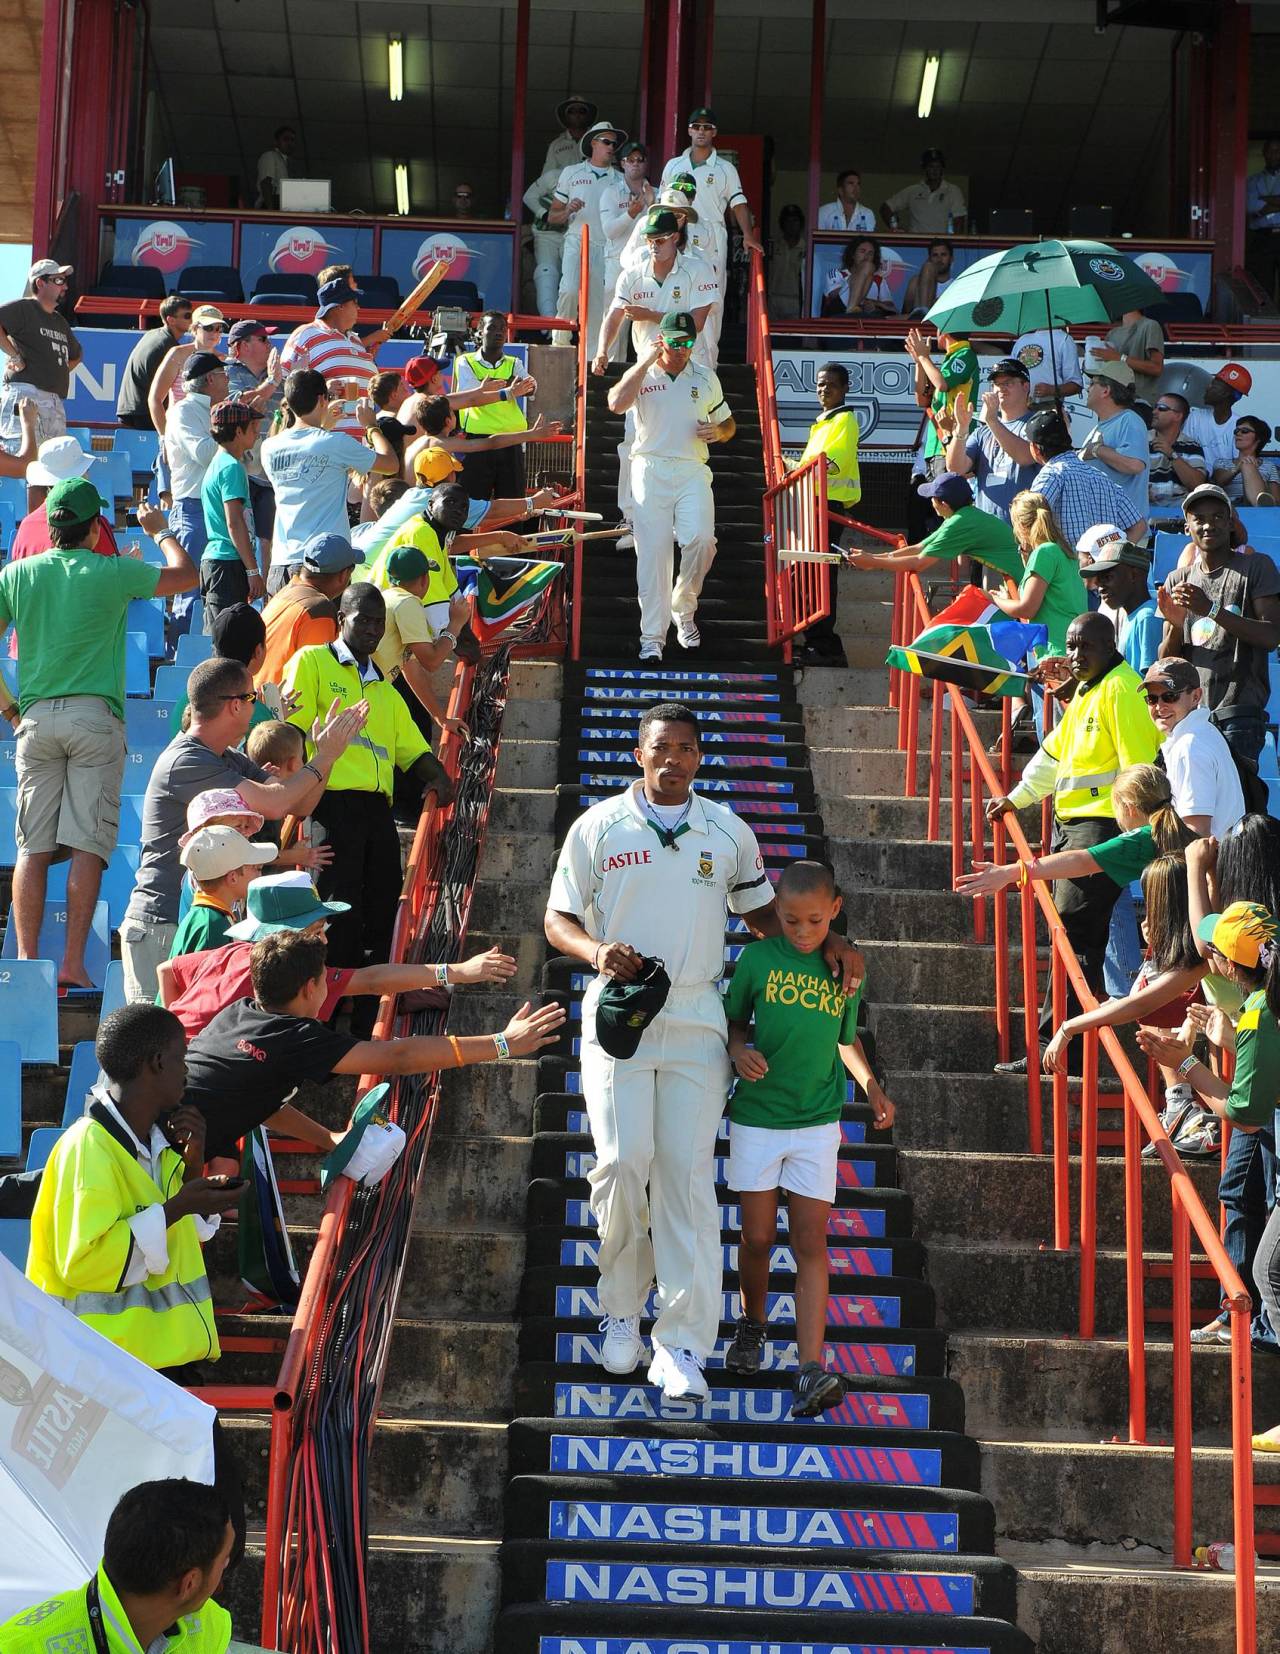 Makhaya Ntini's son joins him as he leads South Africa out onto the field for his 100th cap, South Africa v England, 1st Test, Centurion, December 17, 2009